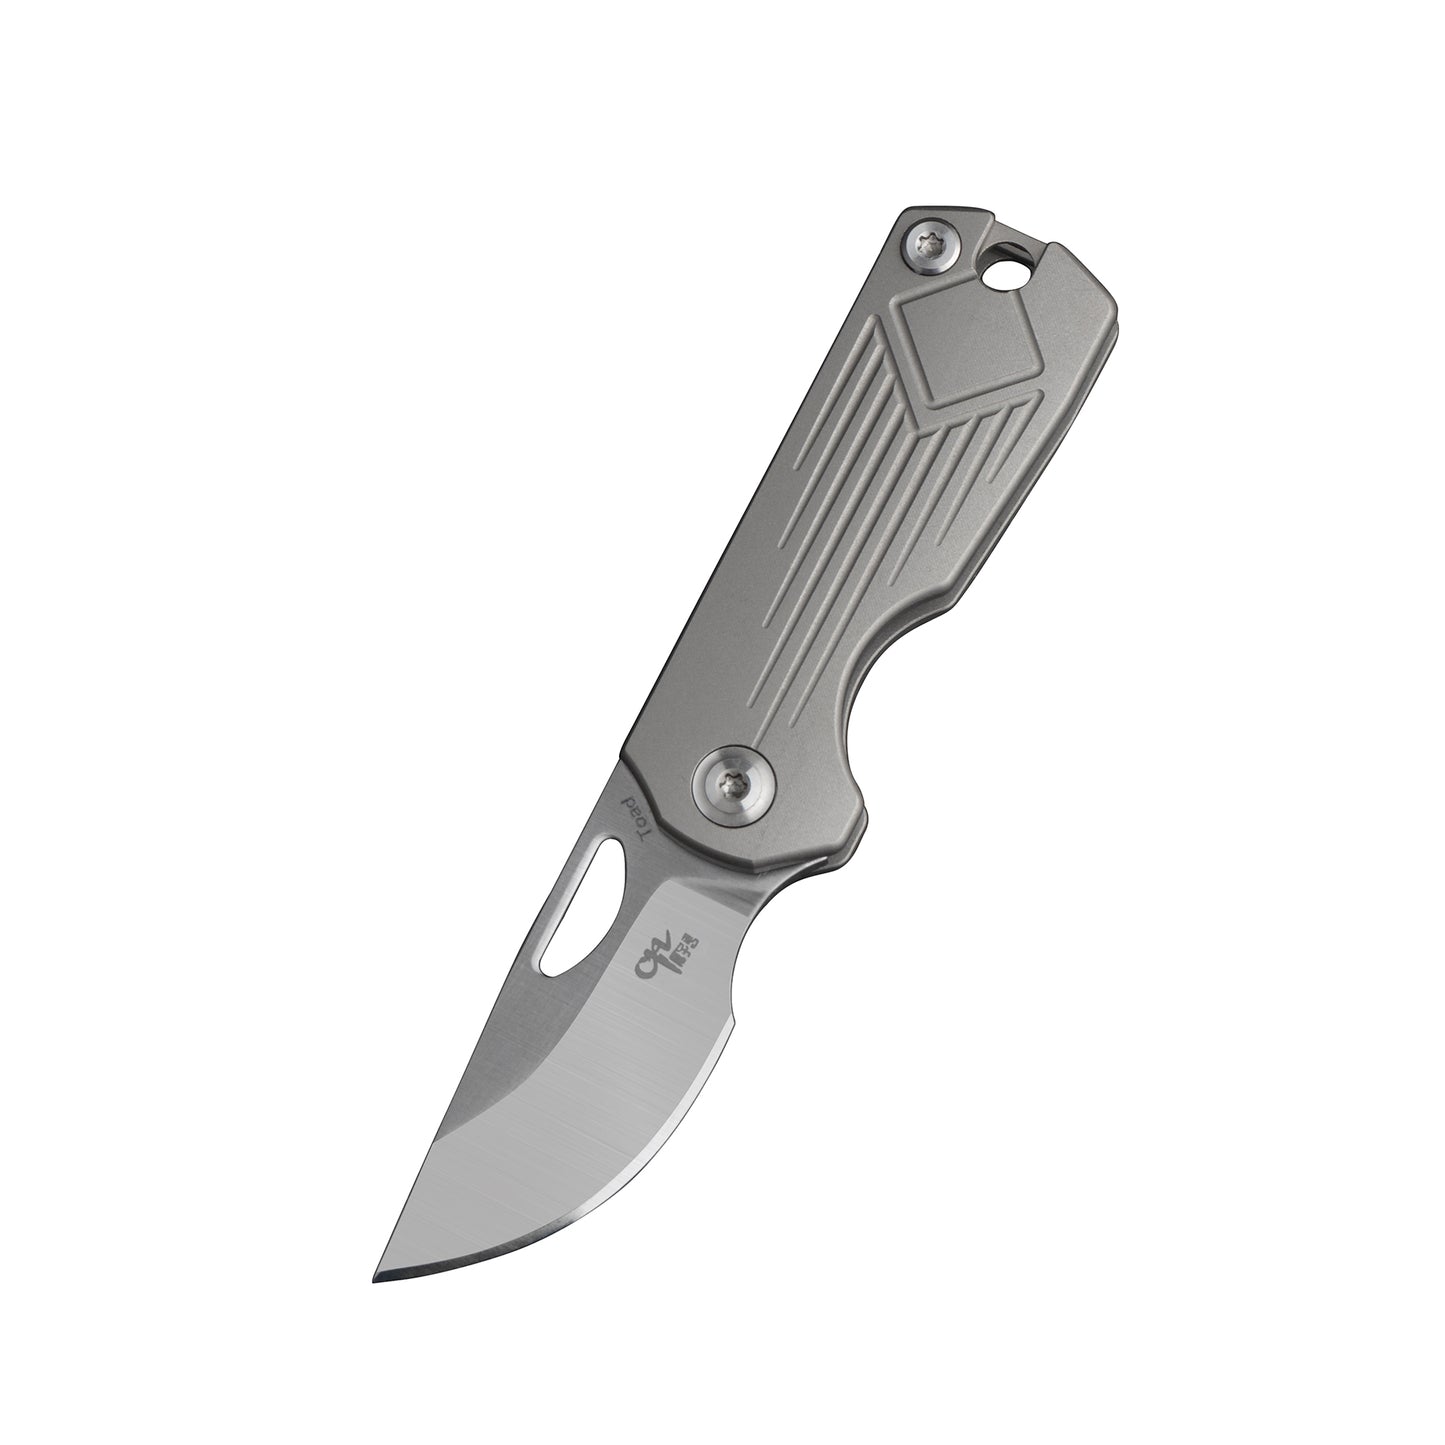 CH Toad AUS-8 Ti Handle Folding Knife